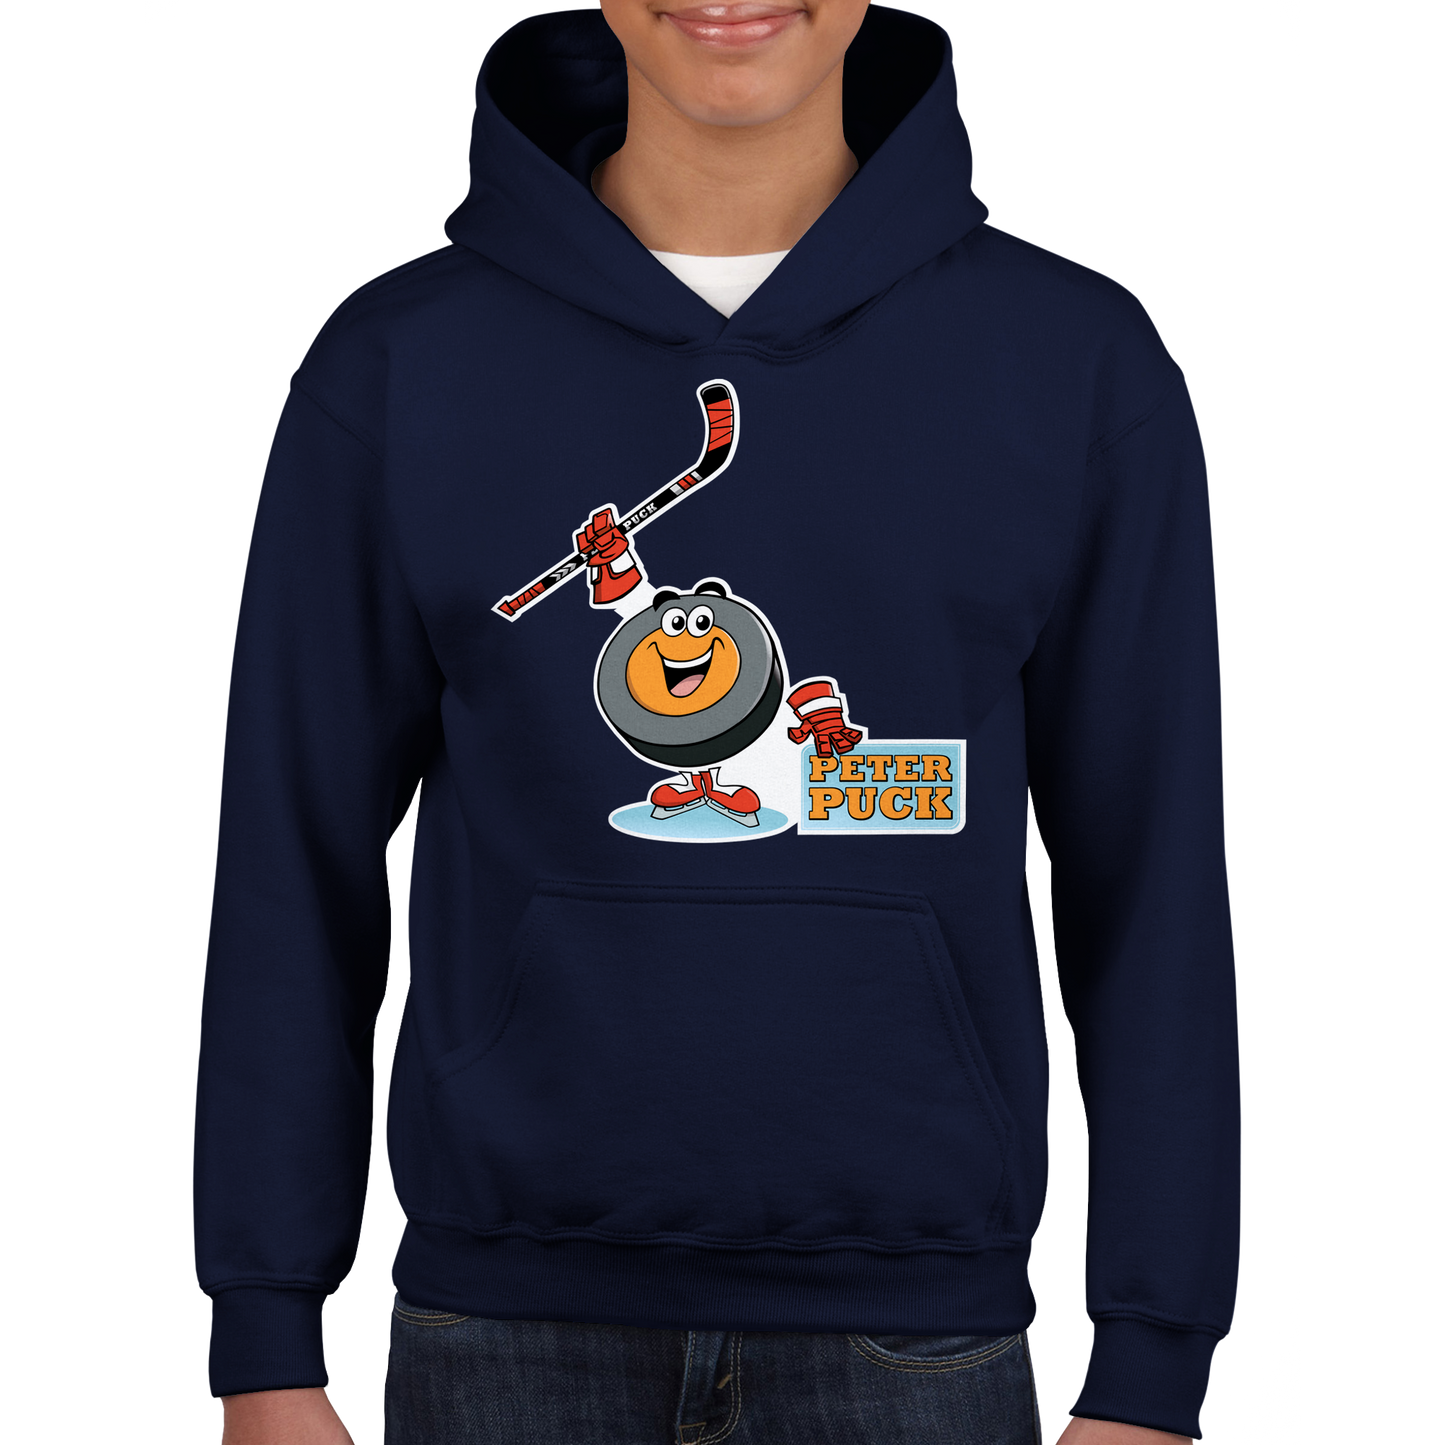 Peter Puck Celly Classic Kids Pullover Hoodie